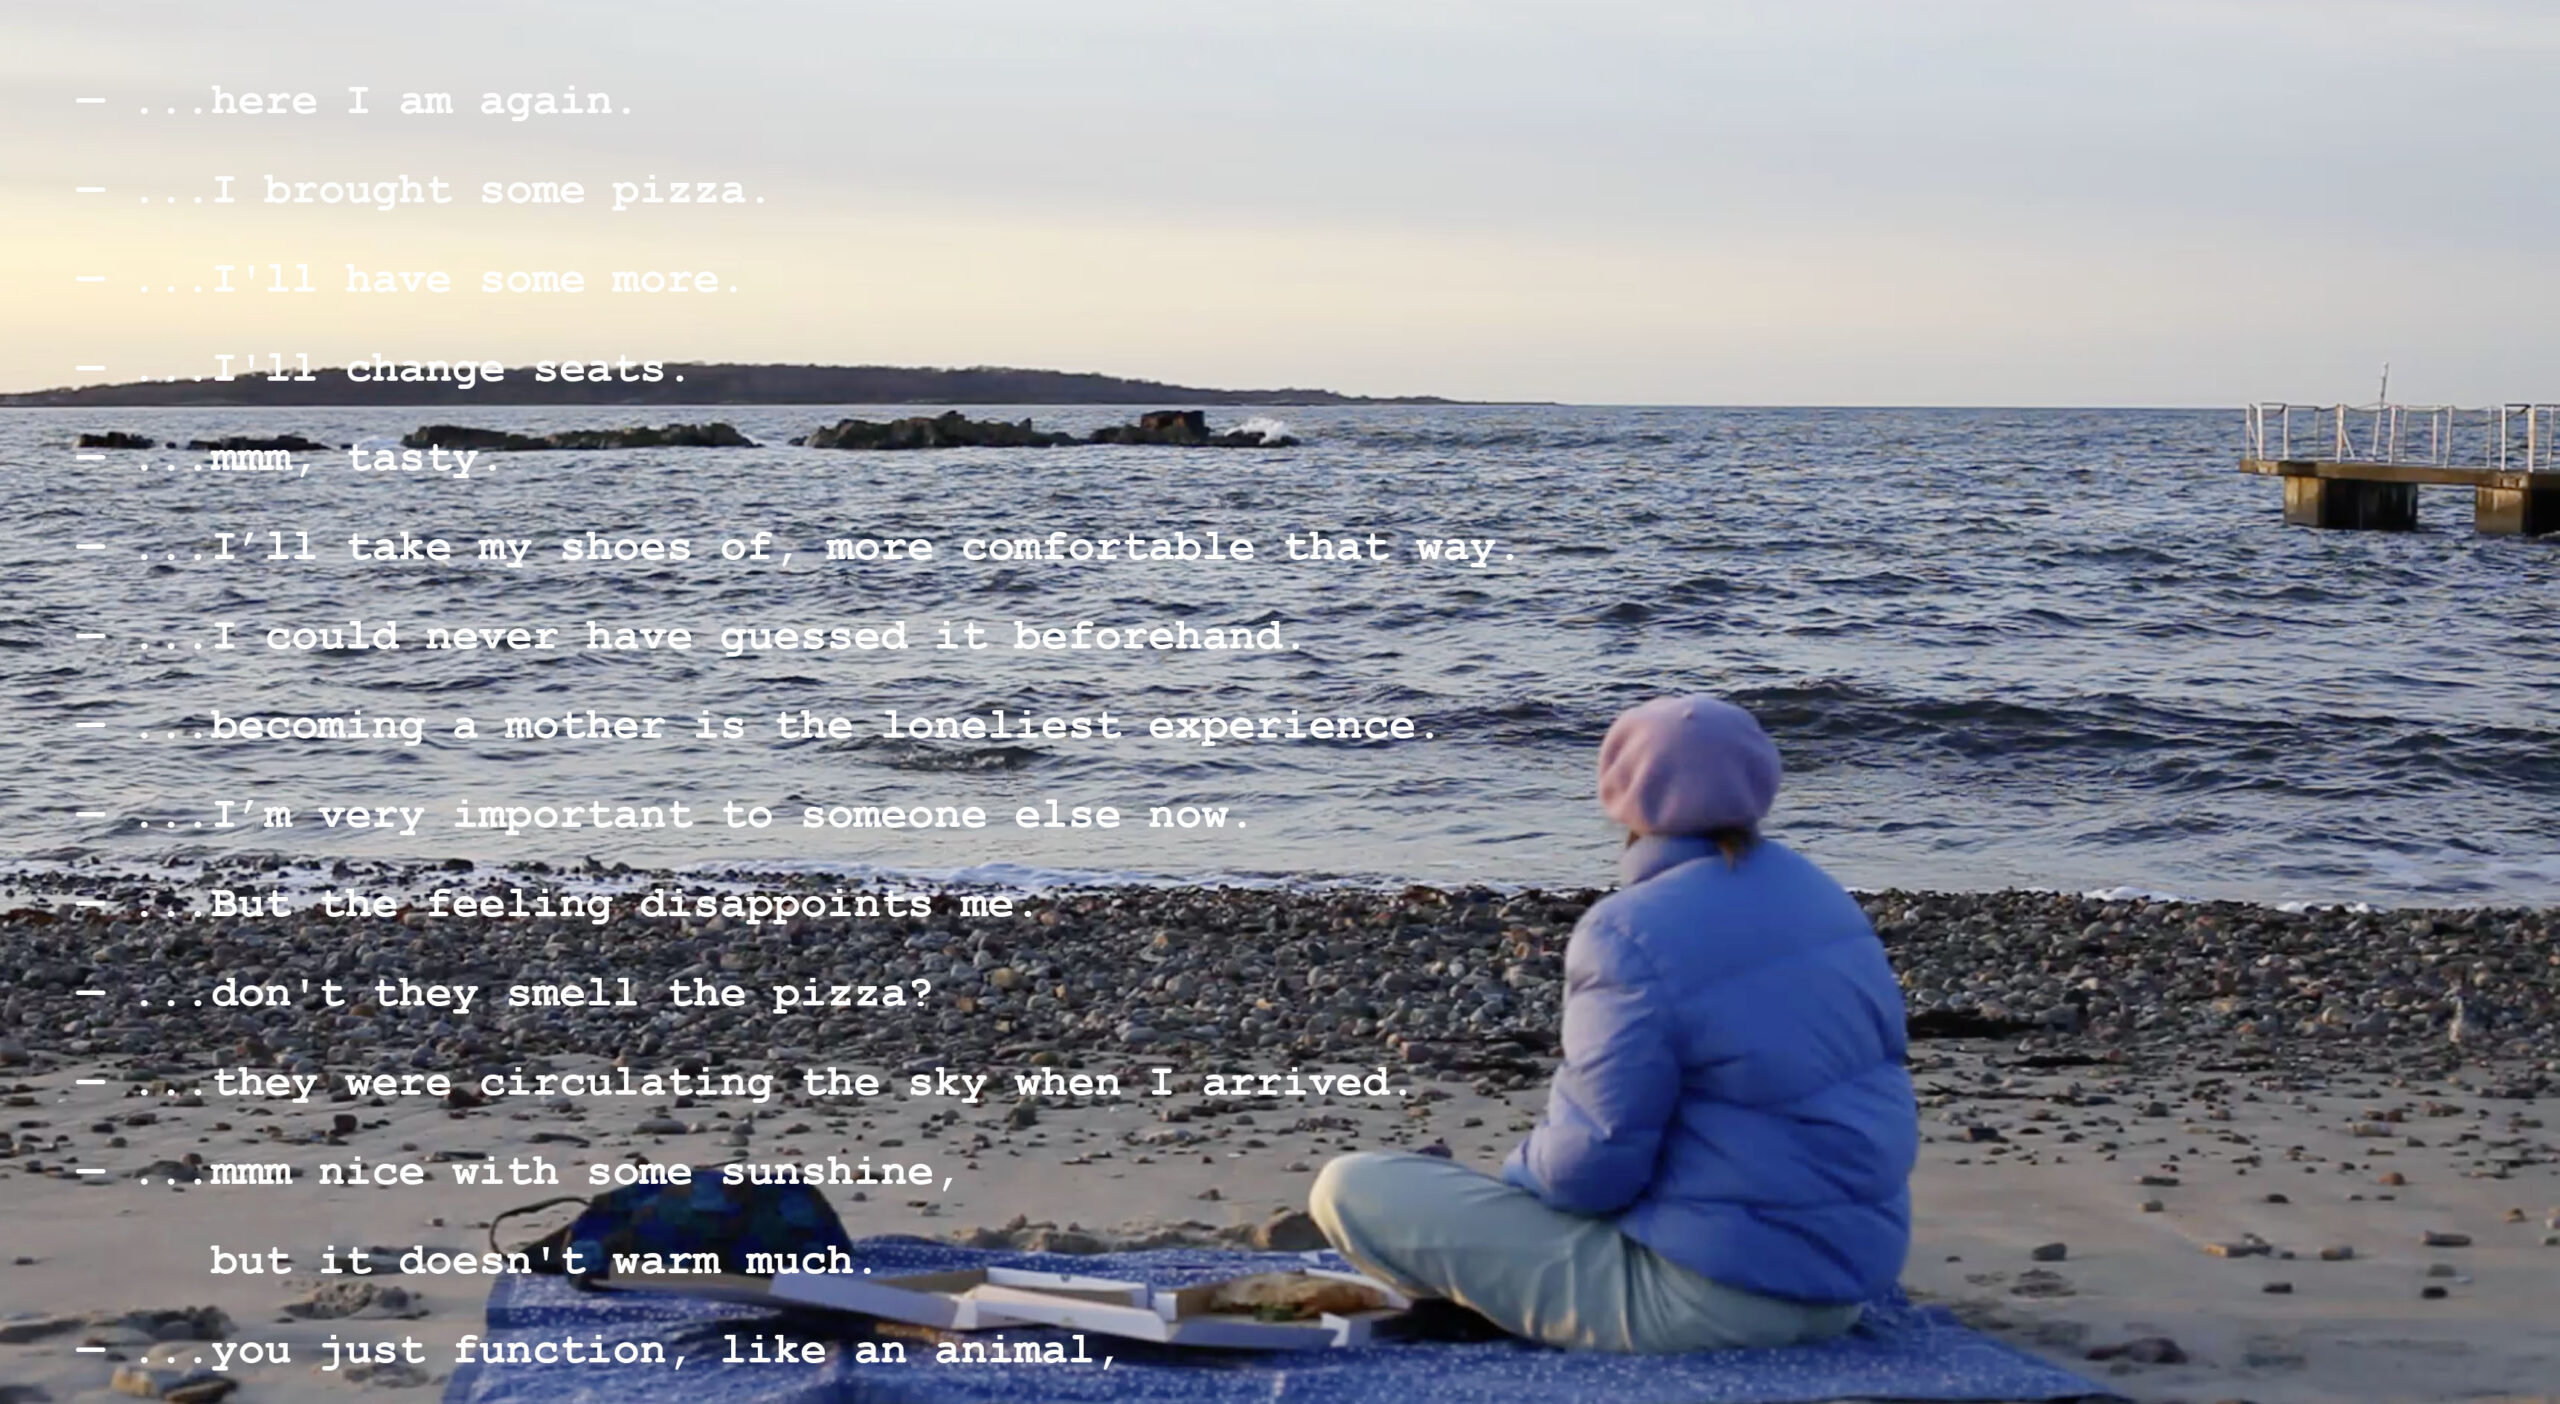 filmstill of person sitting on a beach looking out on the ocean. Text is written over the image.